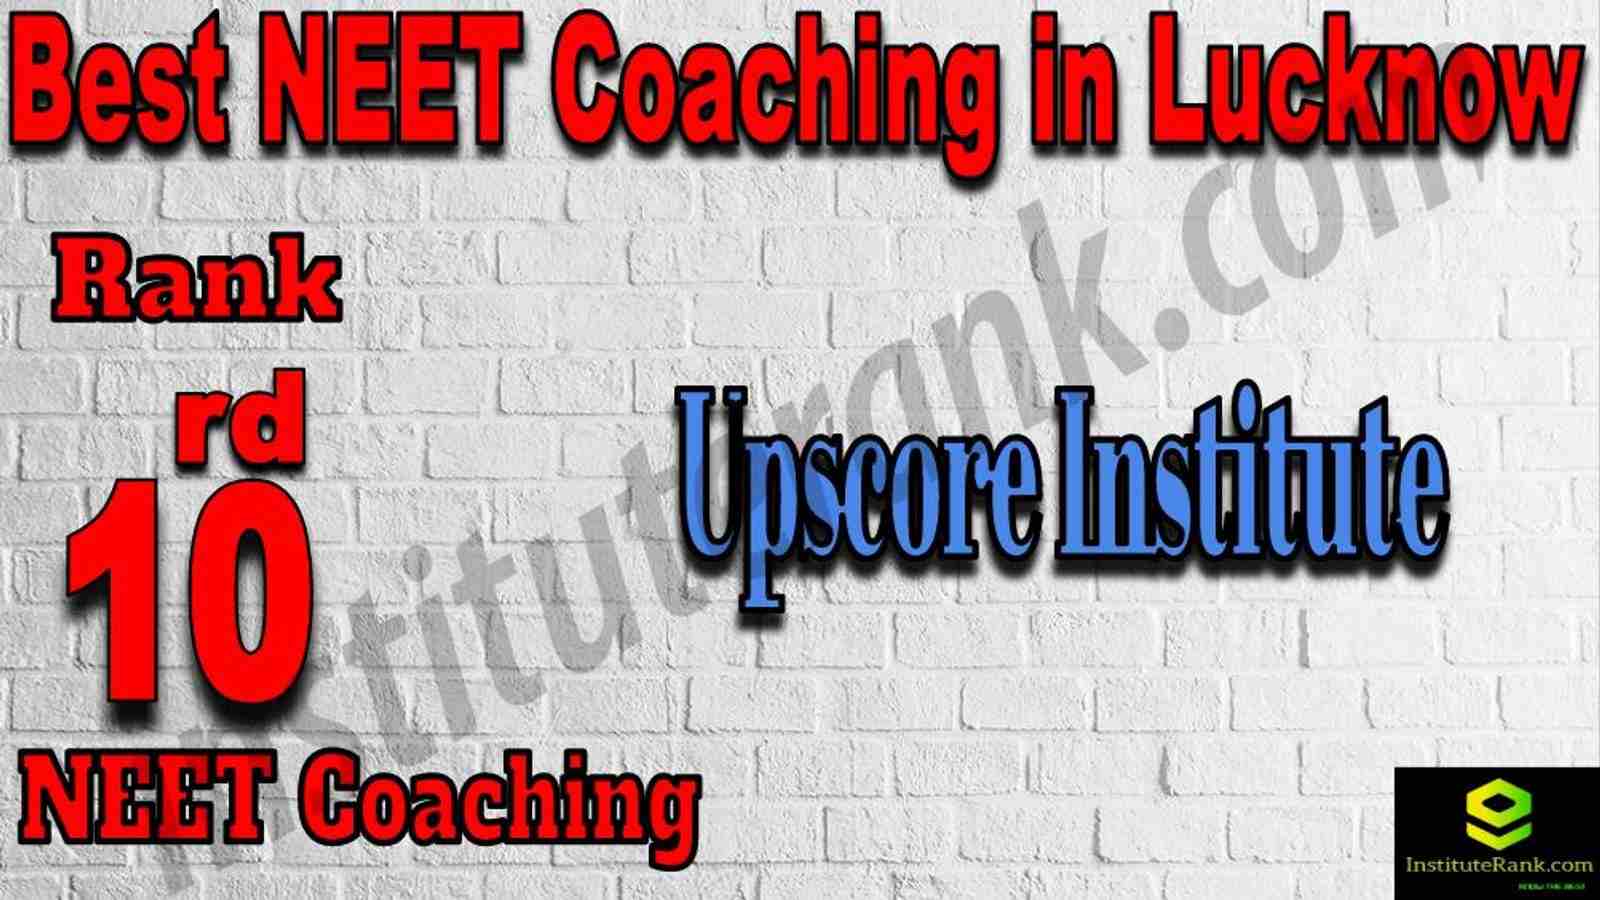 10th Best Neet Coaching in Lucknow